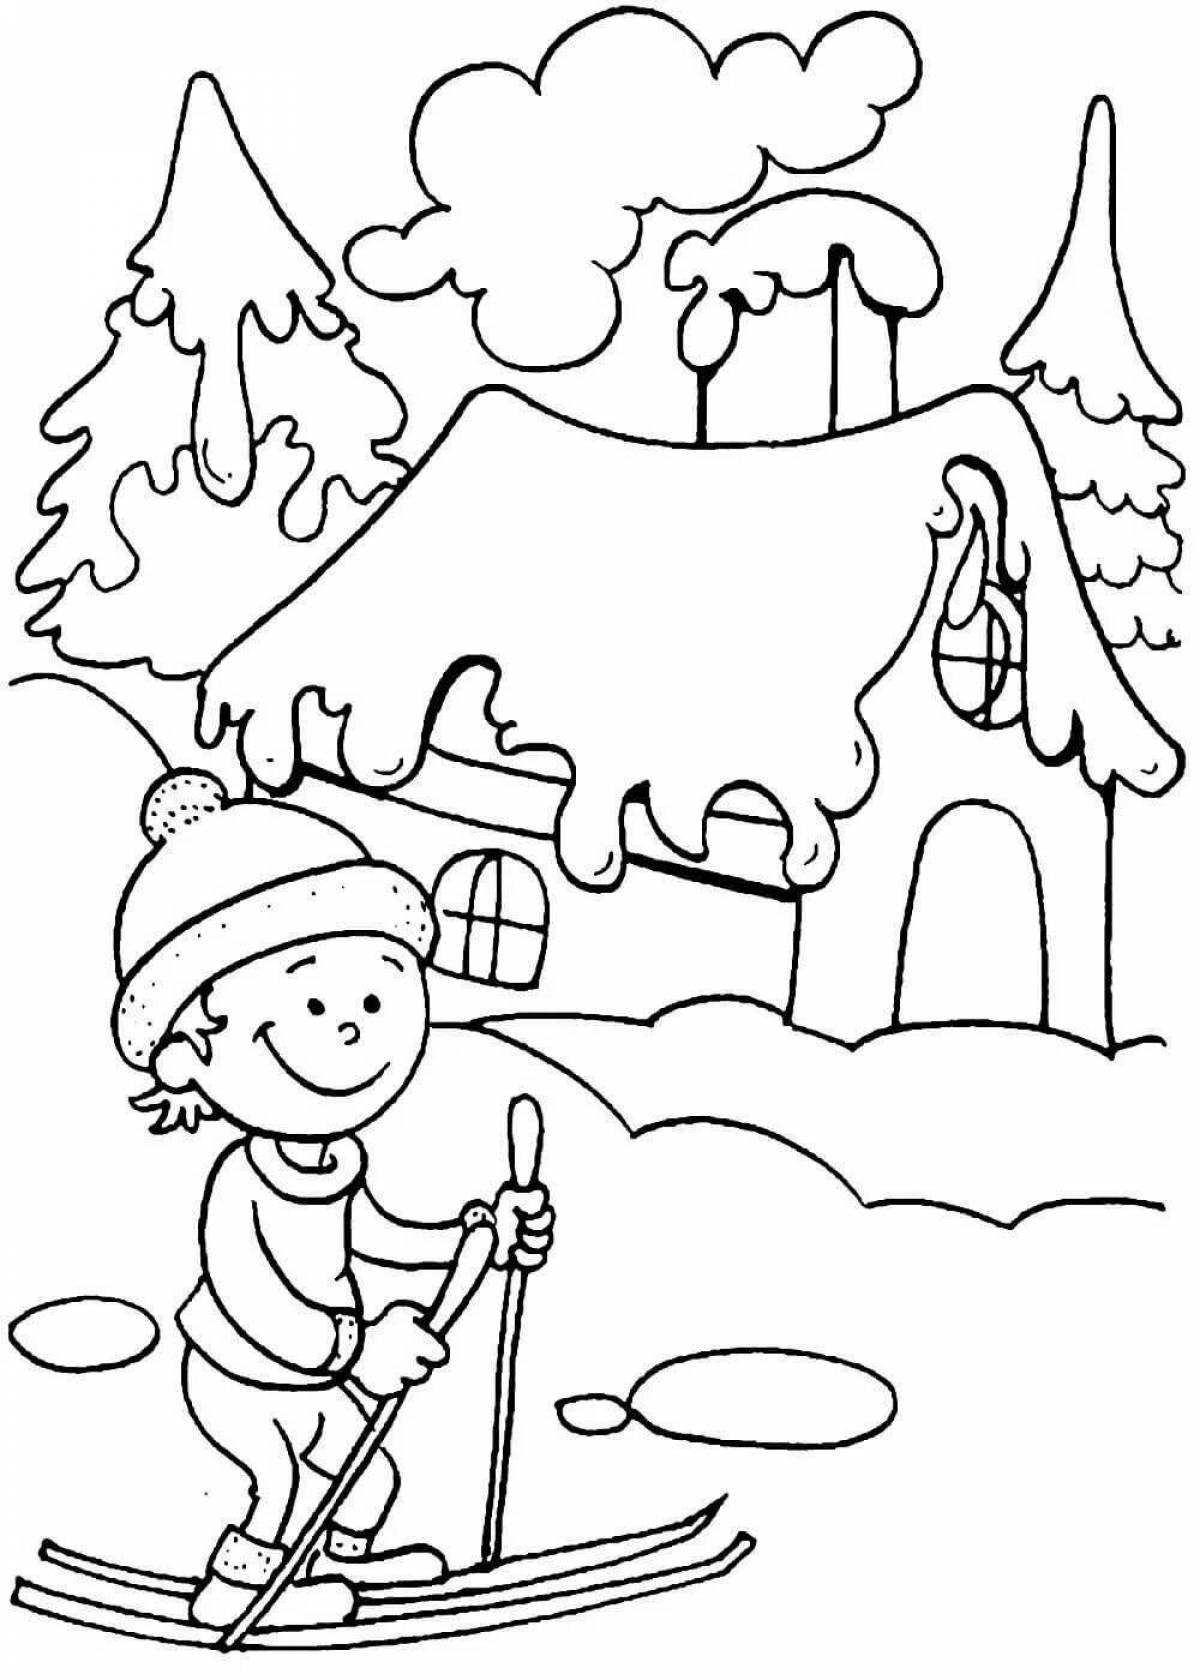 Dazzling winter coloring book for boys